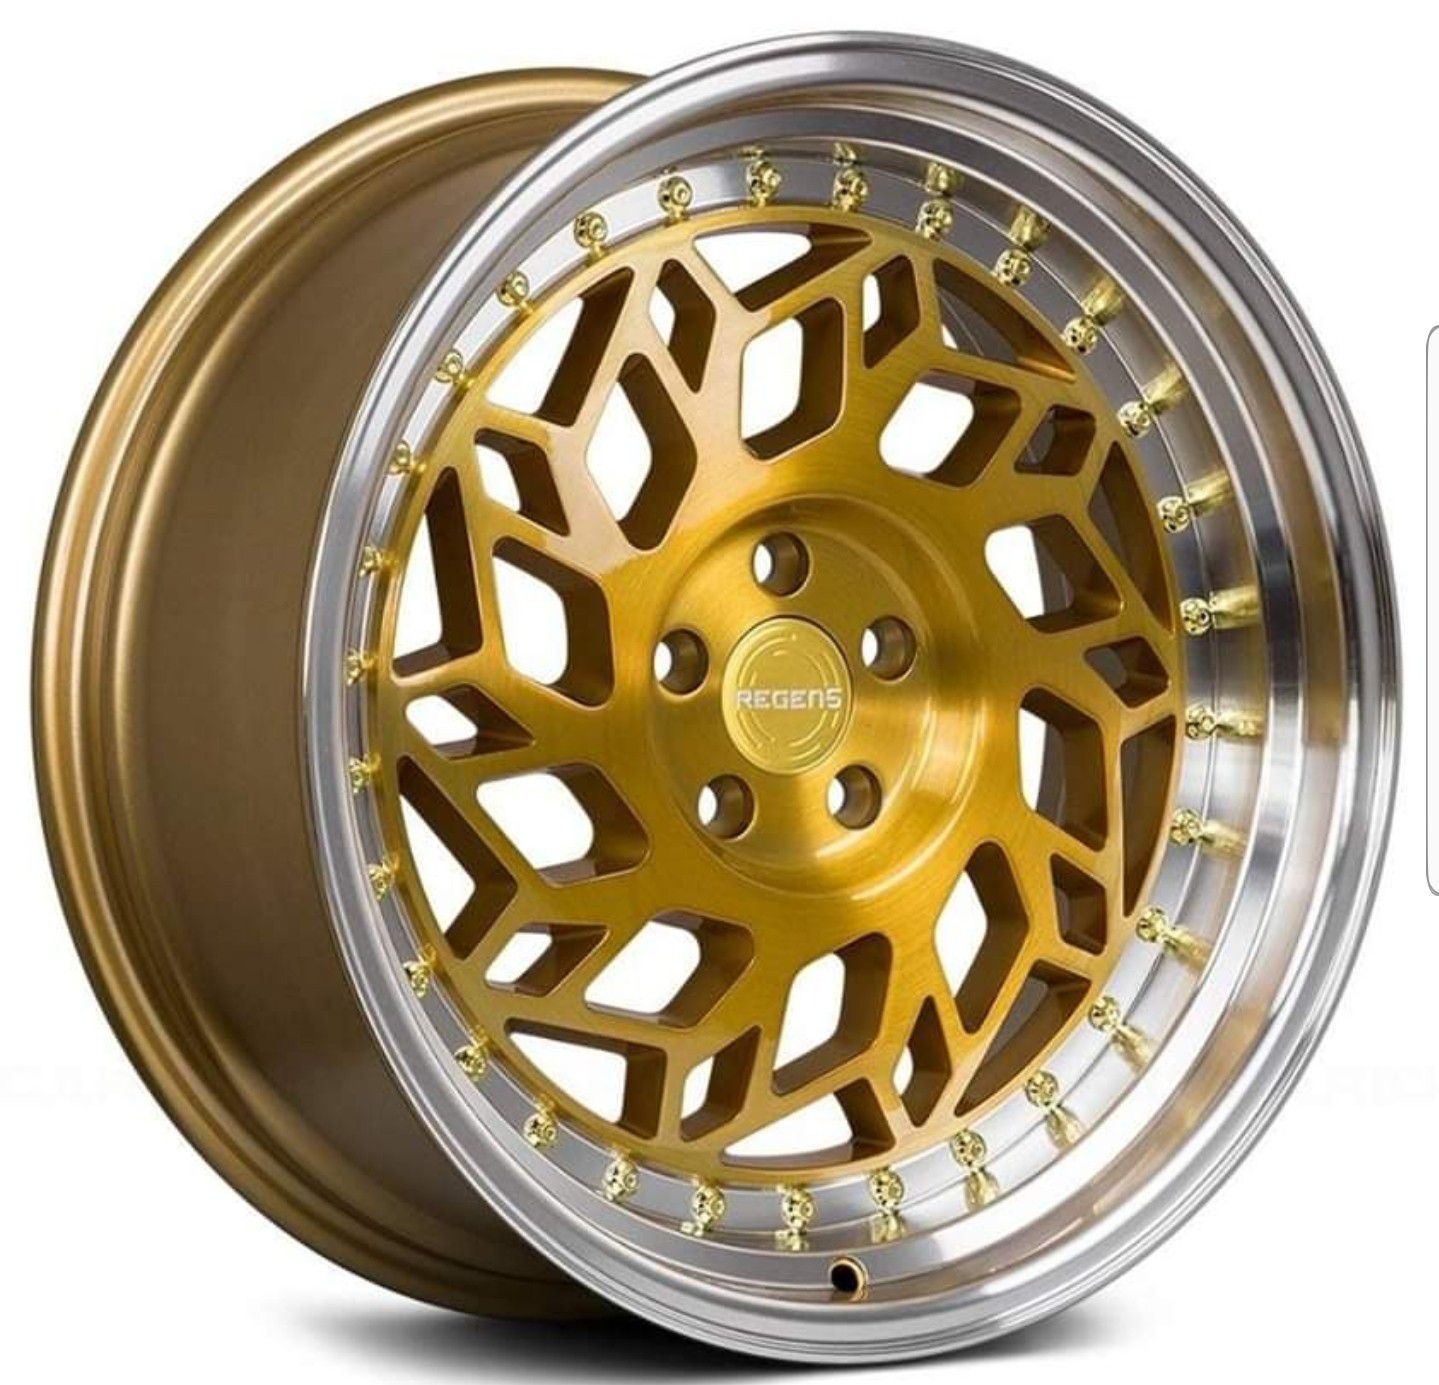 18" inch Regen5 R32 Gold machined wheel rim & tire packages available! No credit financing!